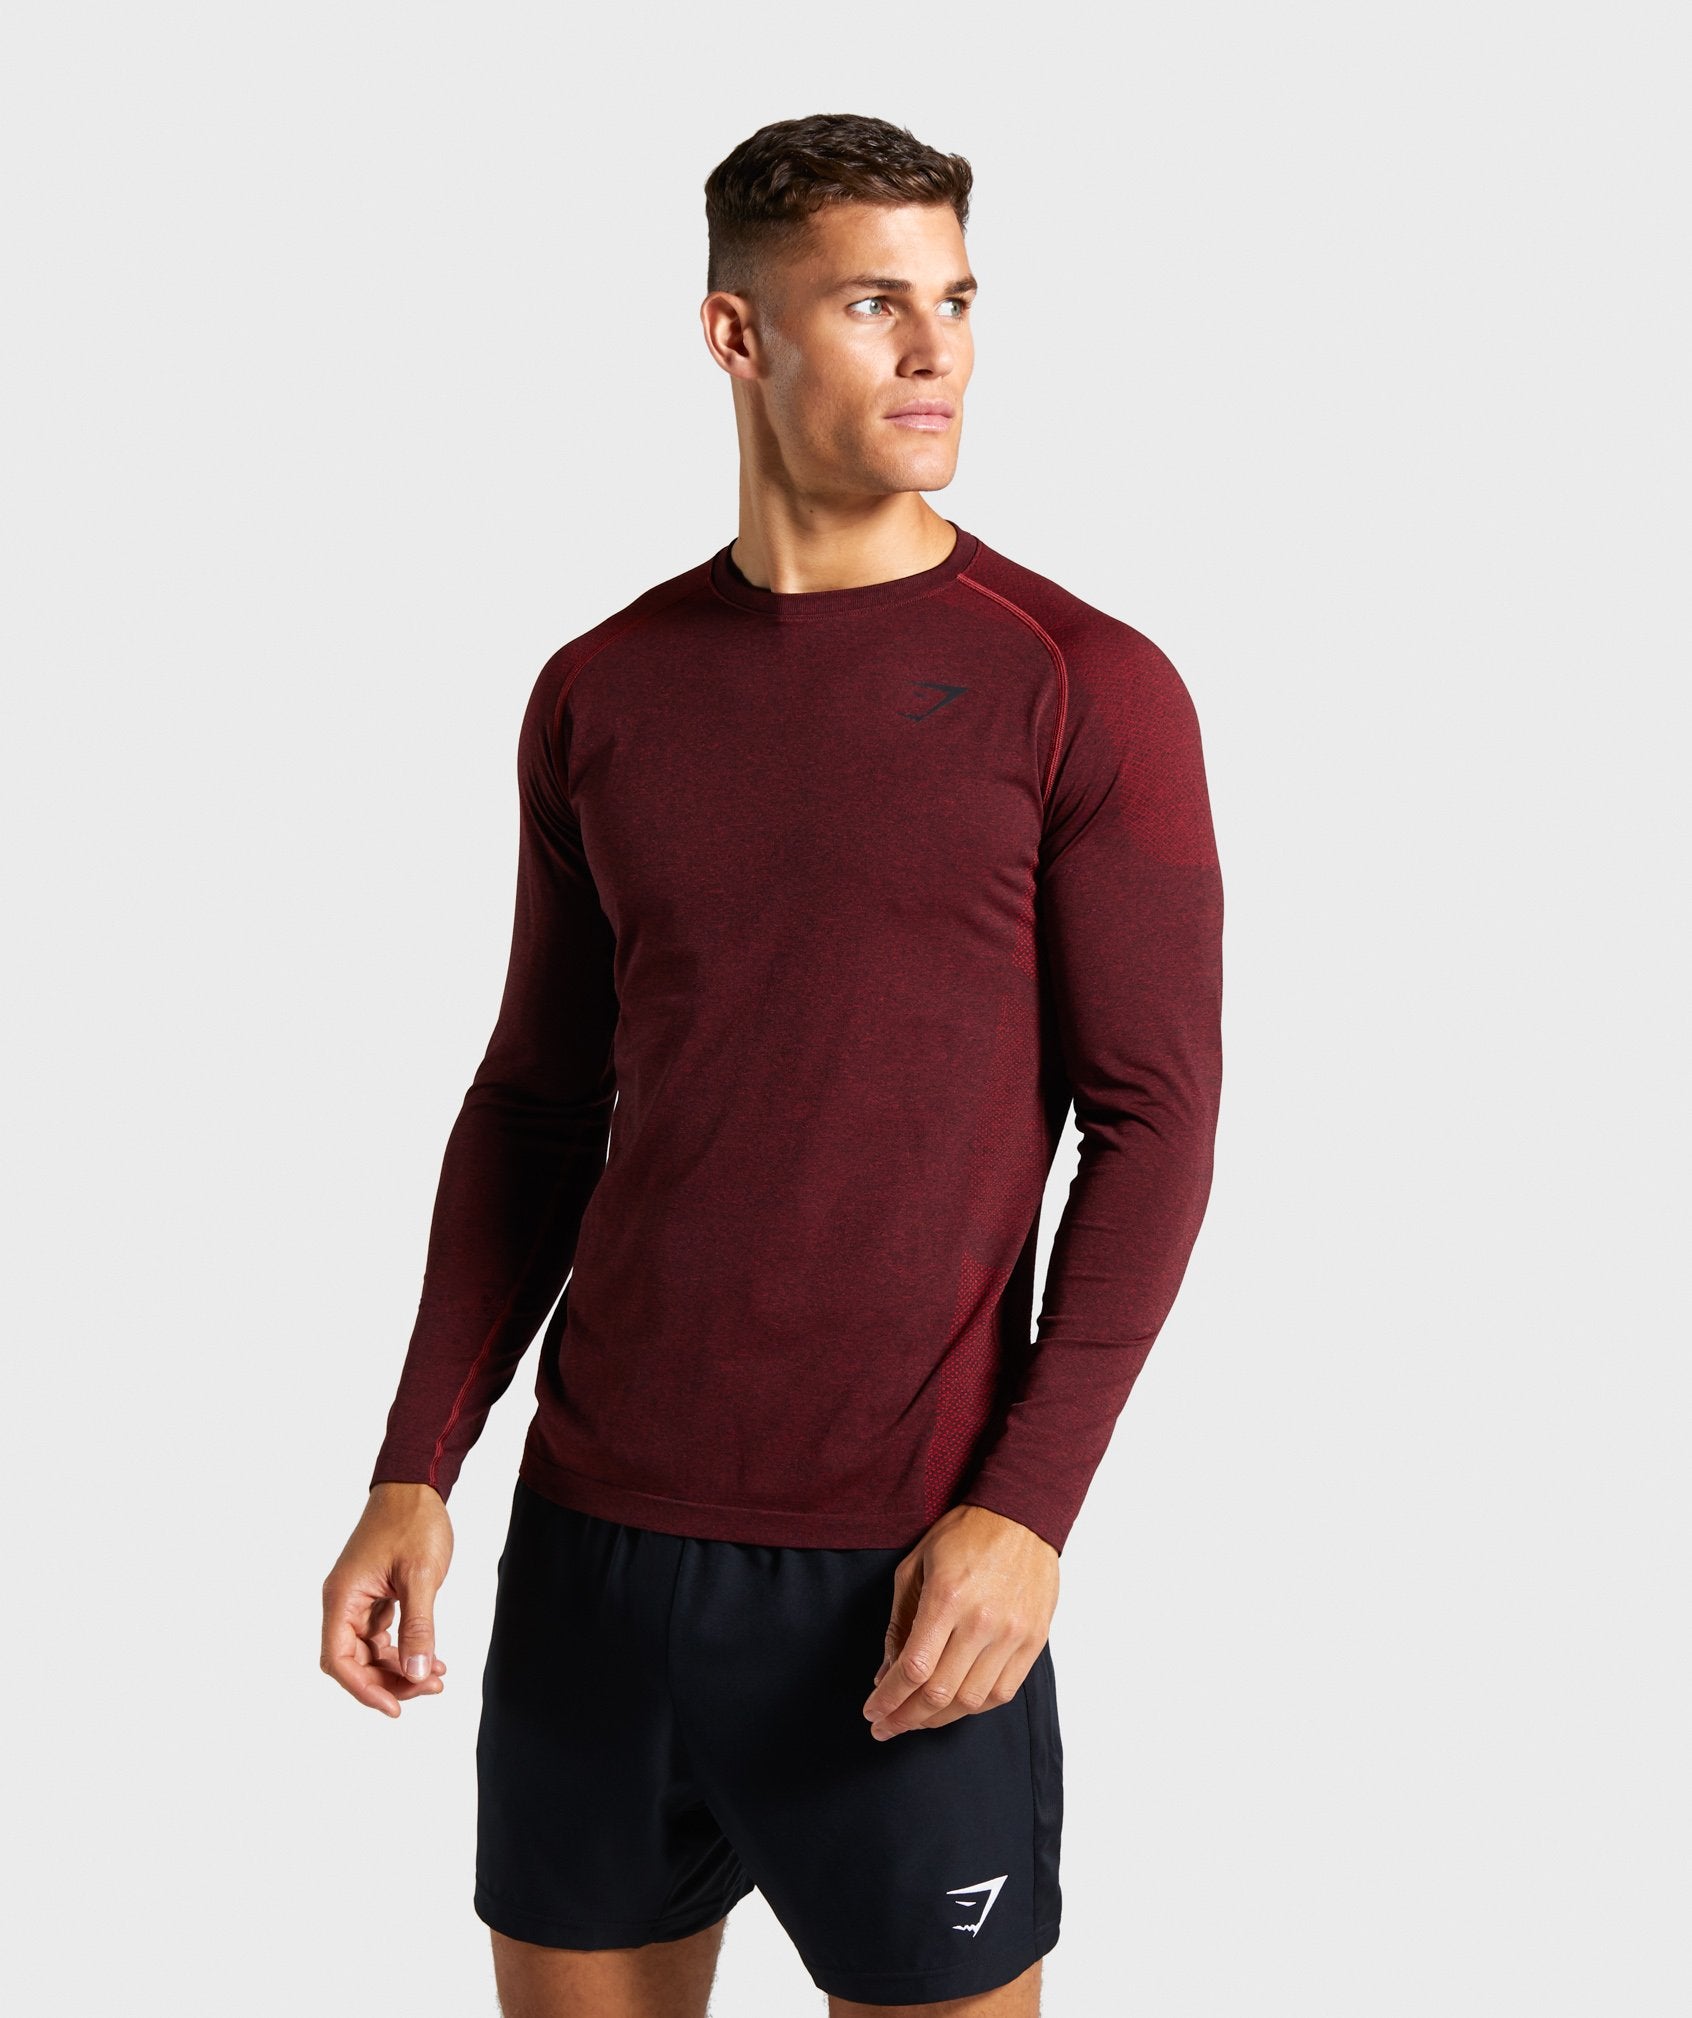 Vital Seamless Long Sleeve T-Shirt in Red - view 1